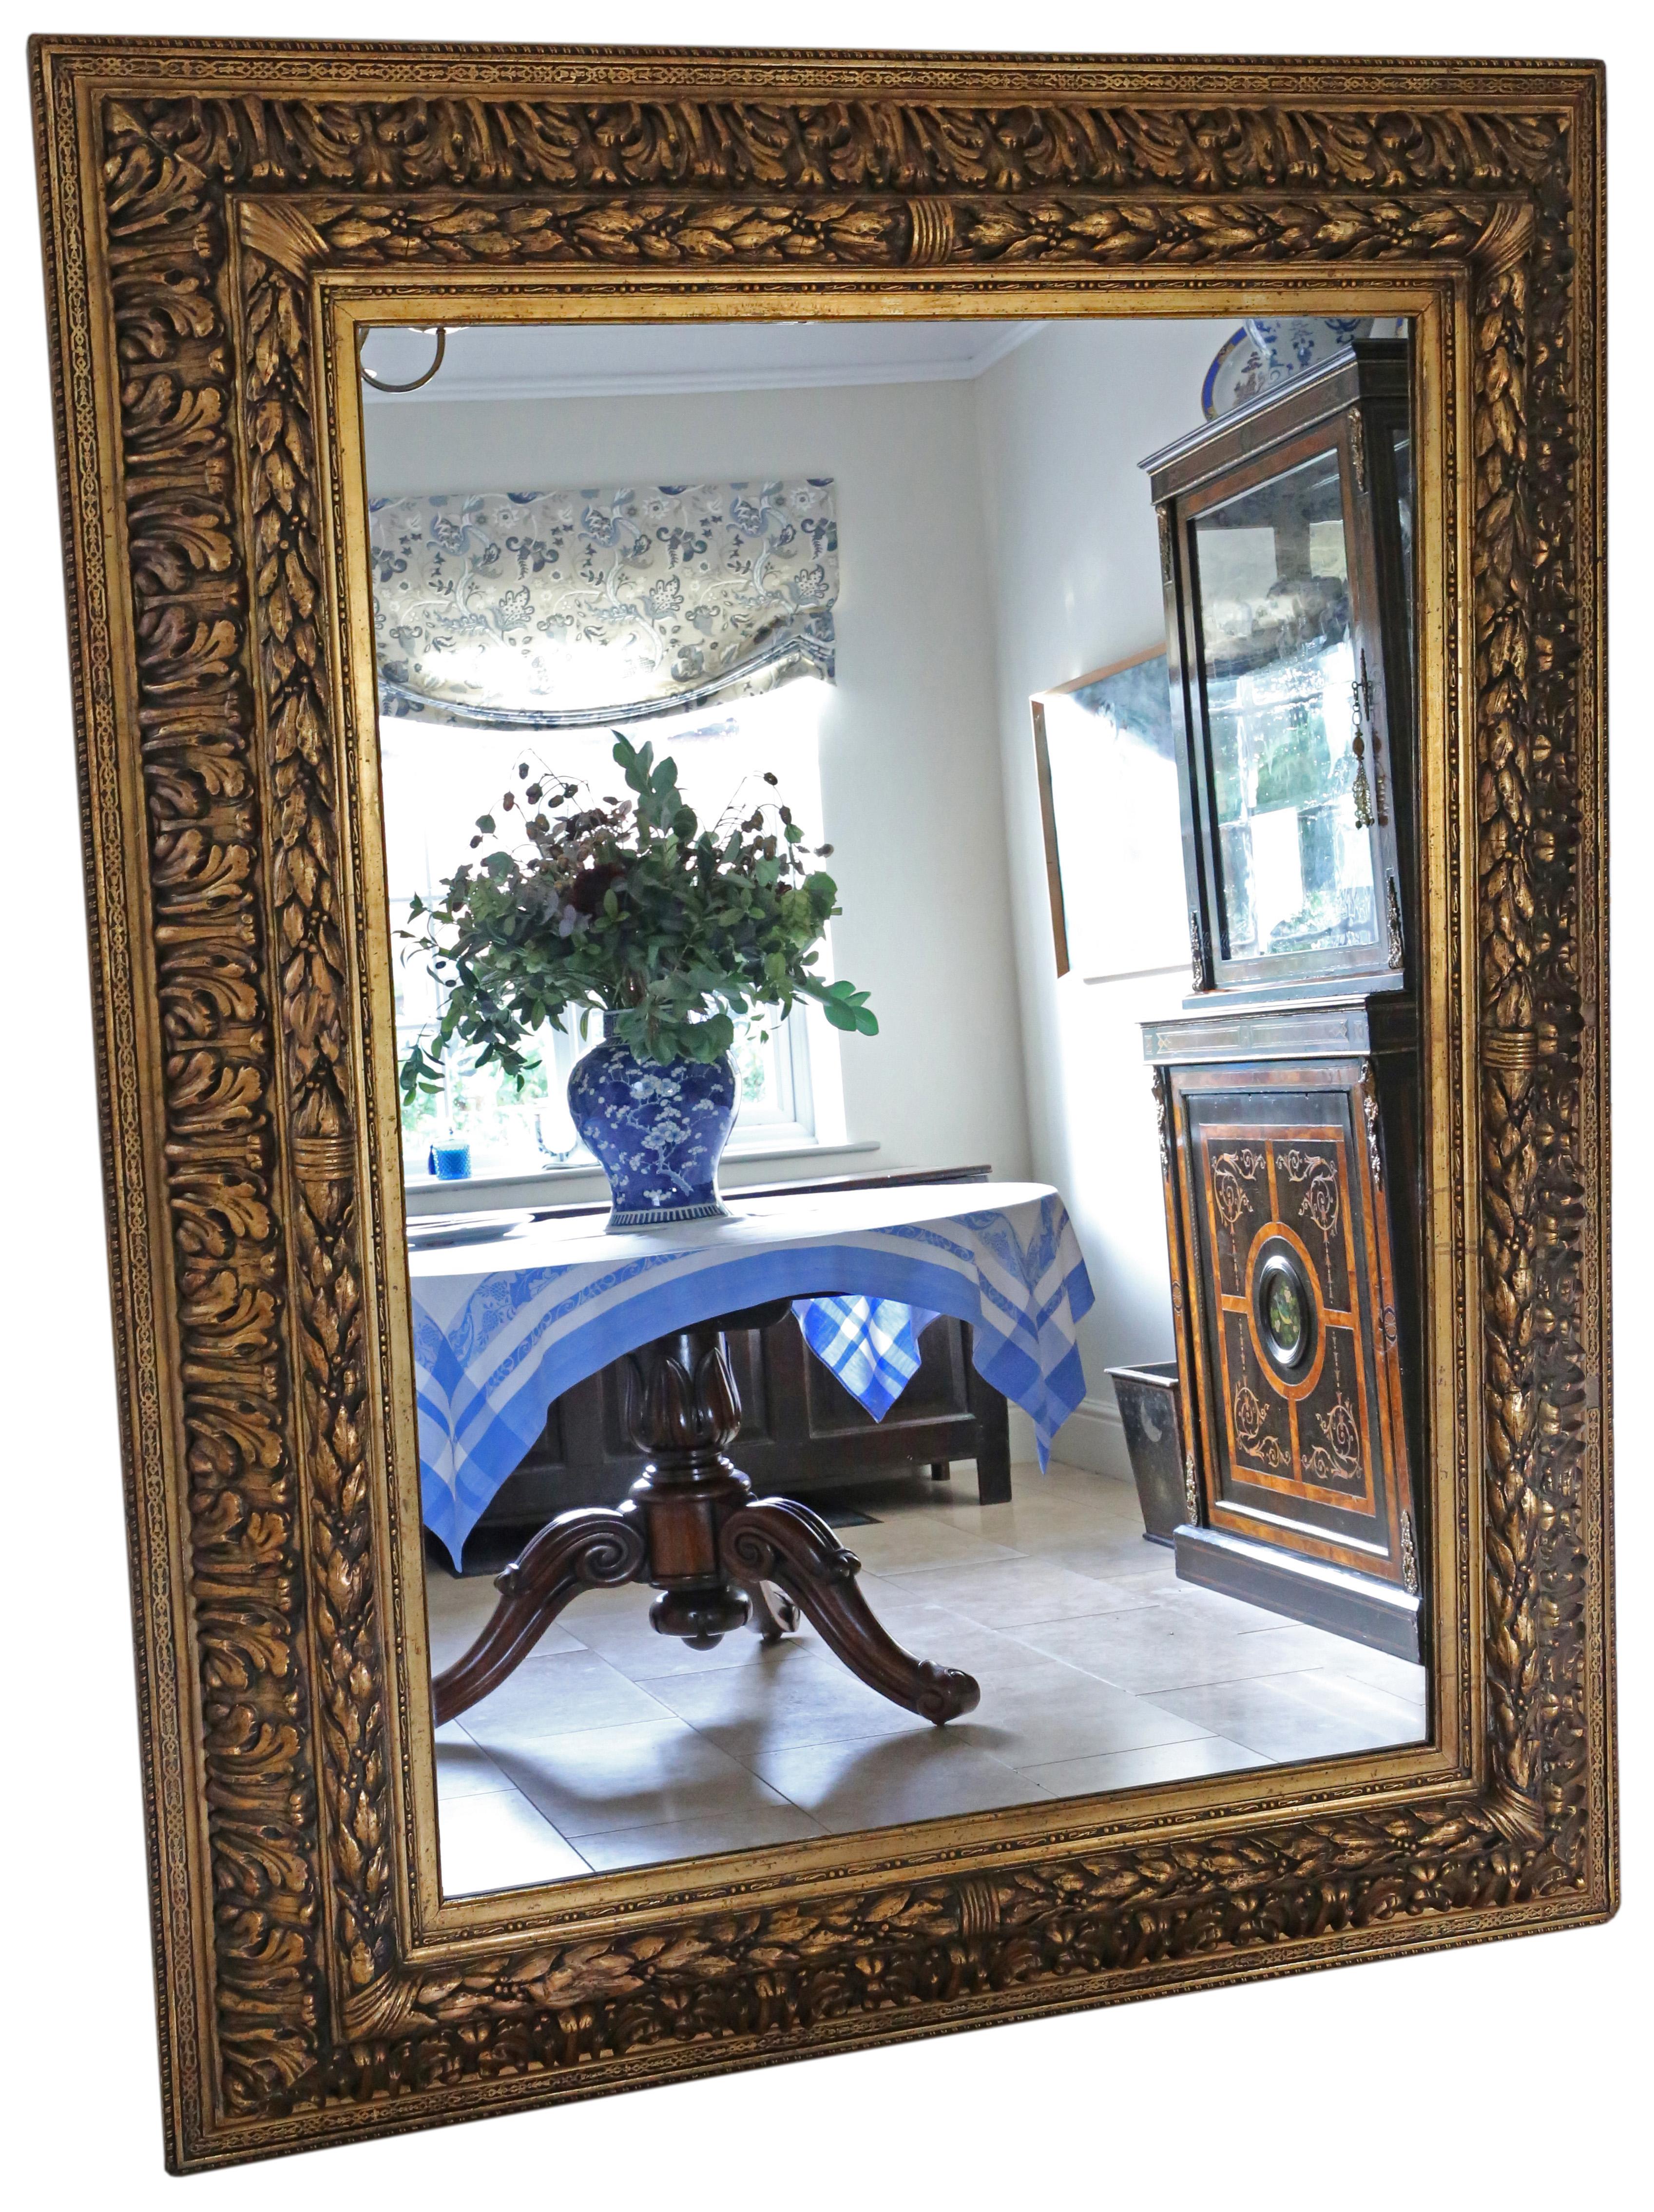 Antique very large fine quality gilt overmantle floor wall mirror 19th Century. Lovely charm and elegance.

This is an impressive rare statement piece. A bit different and quite special.

An impressive find, that would look amazing in the right